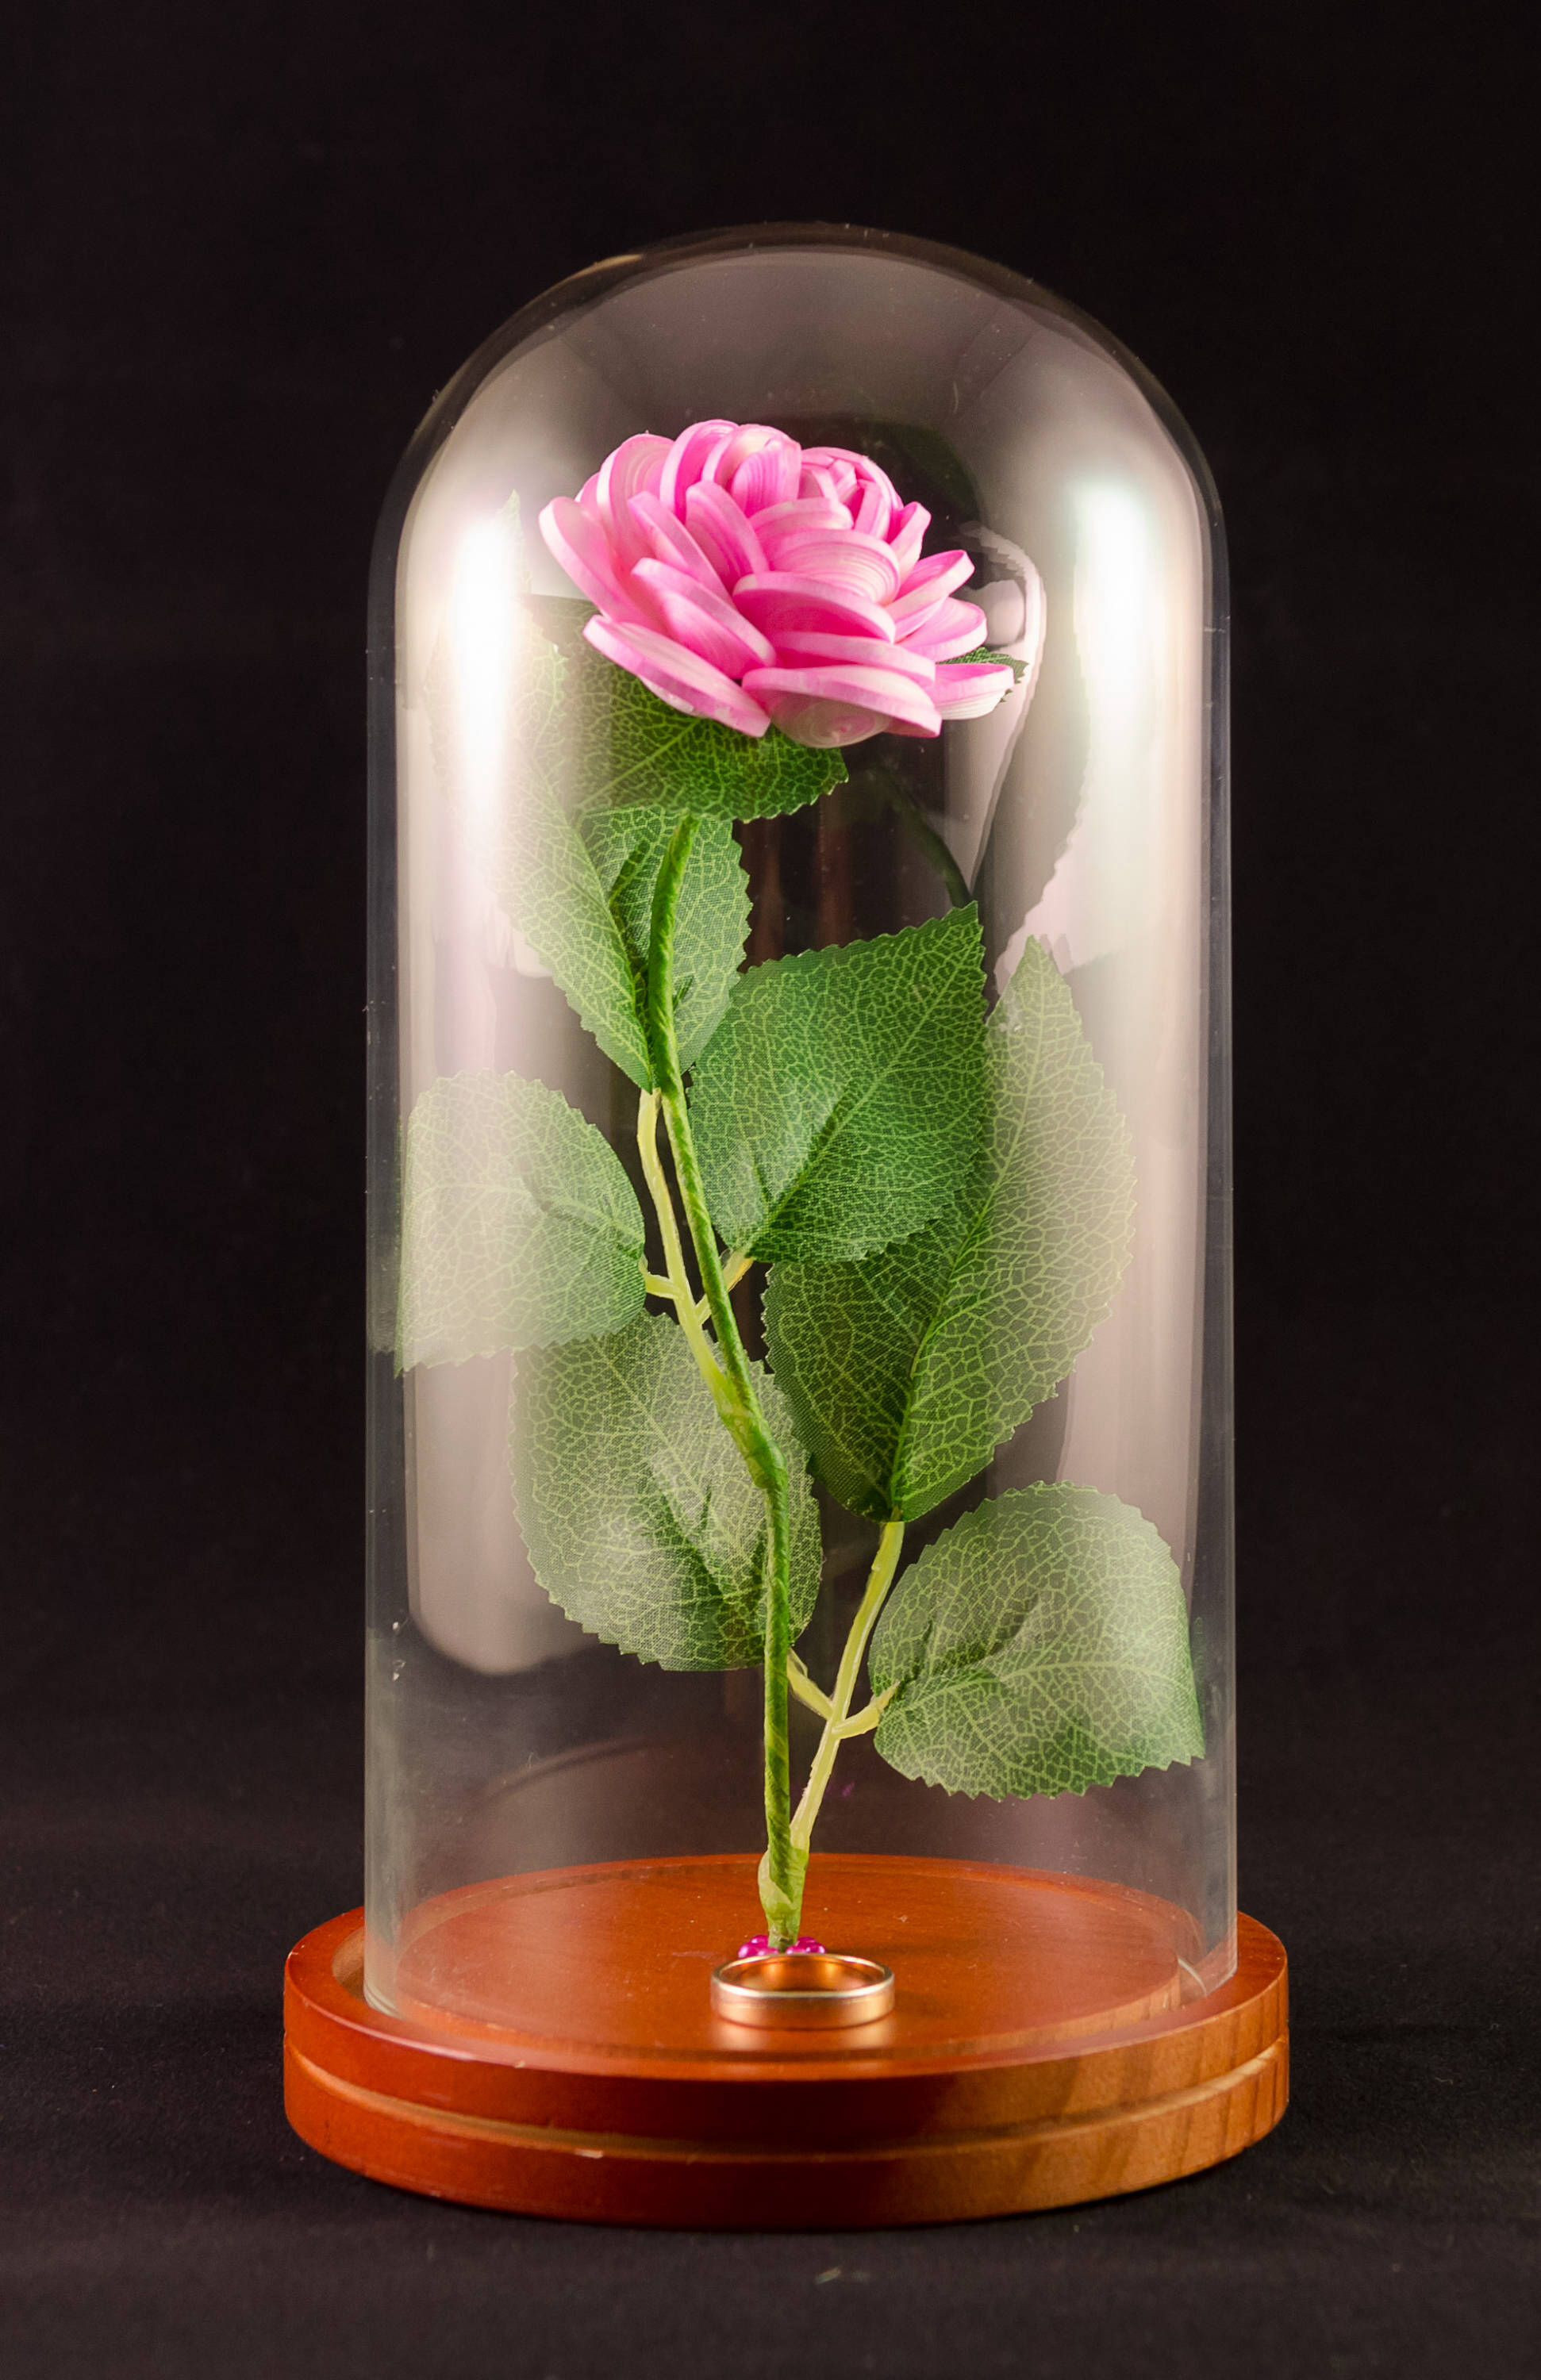 16 Famous Rose Glass Vase 2024 free download rose glass vase of elegant beauty and the beast flower vase otsego go info intended for beauty and the beast flower vase awesome beauty and the beast rose unique proposal ideas disney flower